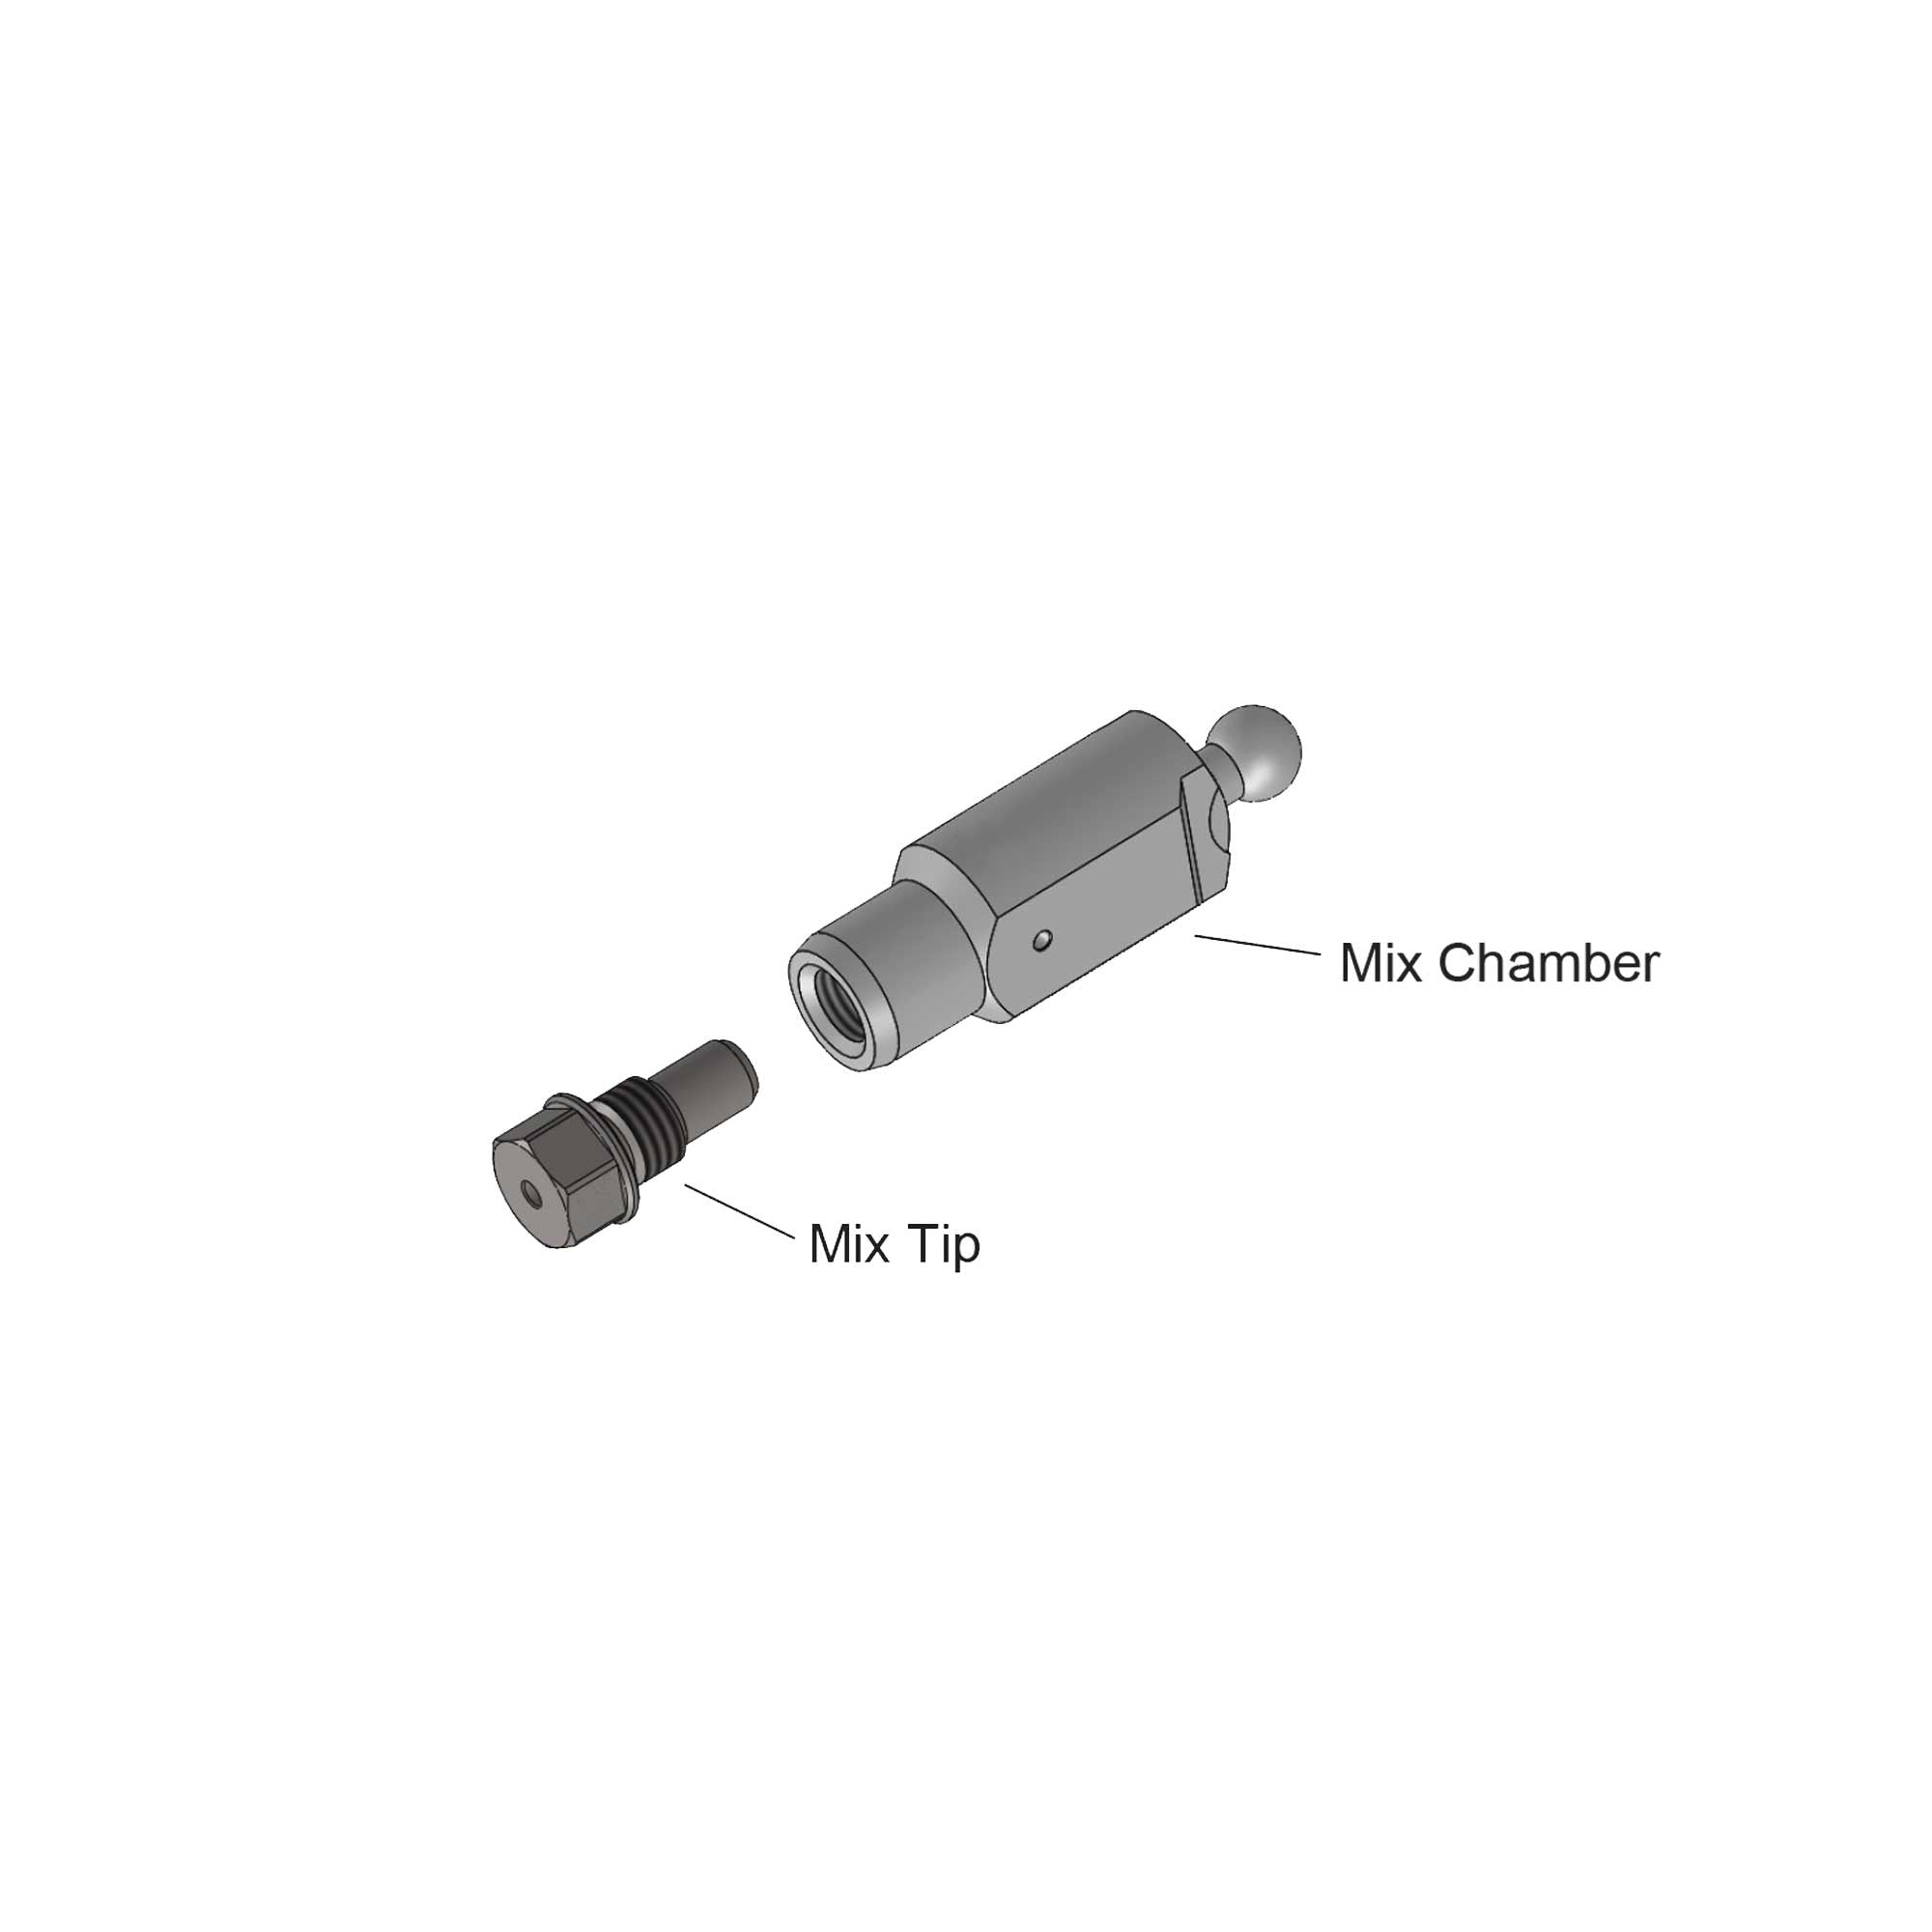 336444 - Mix Chamber E 03 and Tip Kit - PURspray